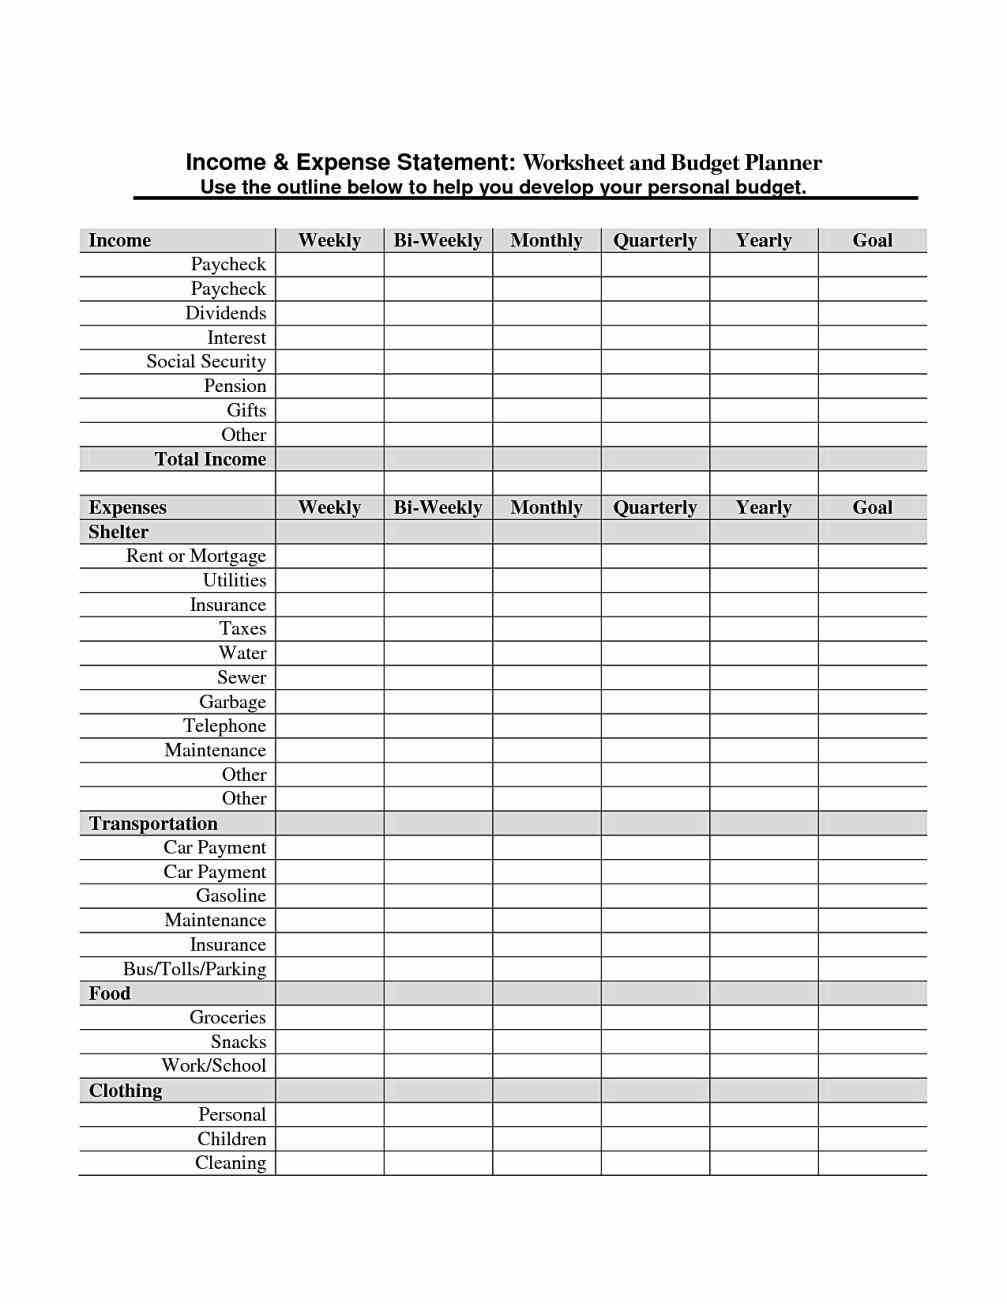 026 Income Statement Template Excel Small Business Ideas With Quarterly Report Template Small Business